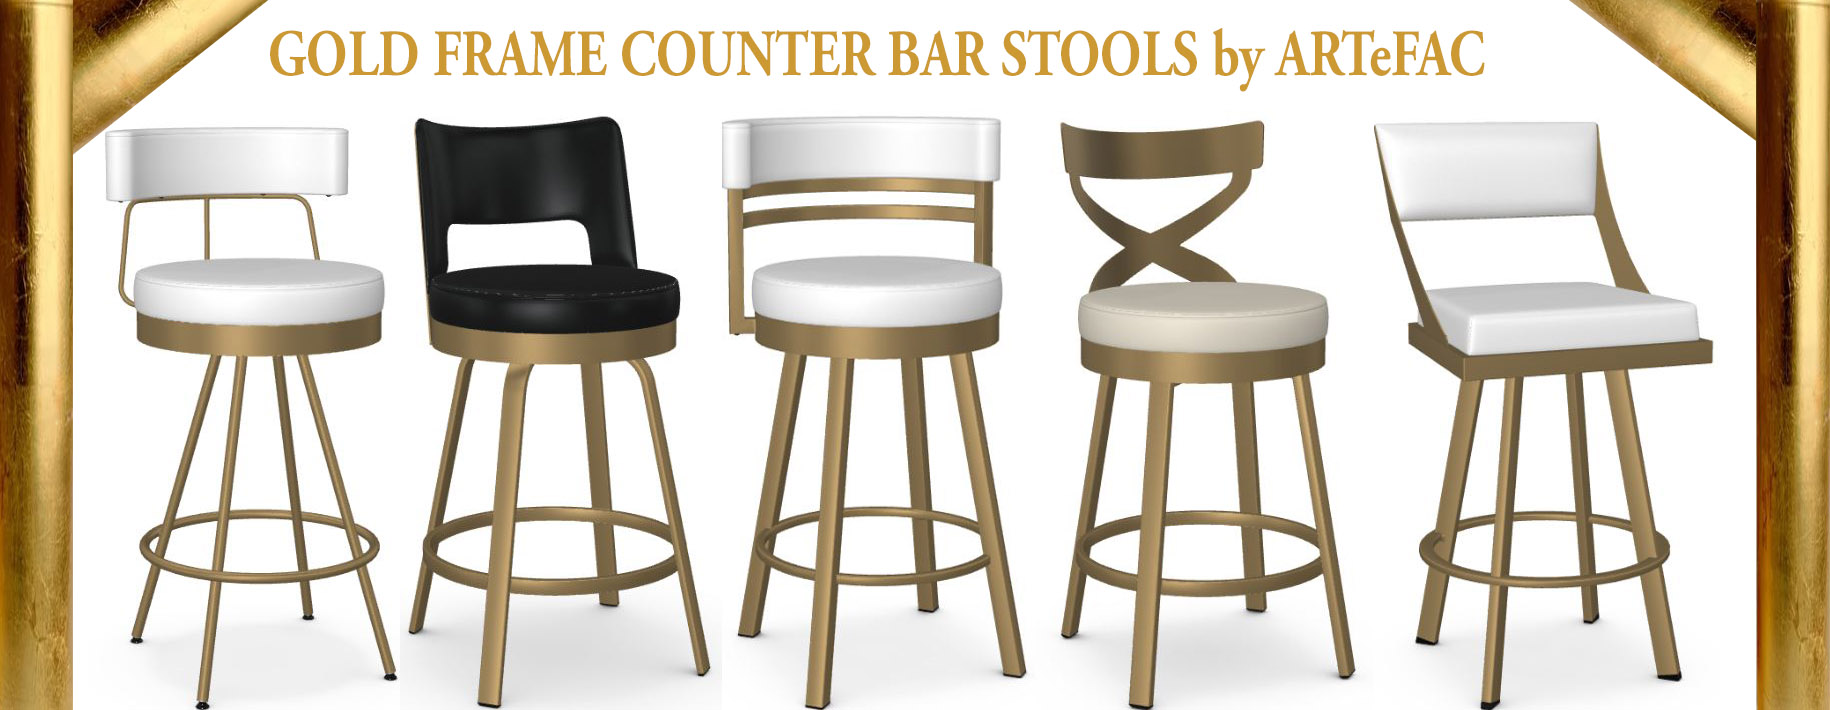 Chairs Bar Stools In Usa Artefac, Faux Leather Upholstered Bar Stools In Bronze Set Of 3